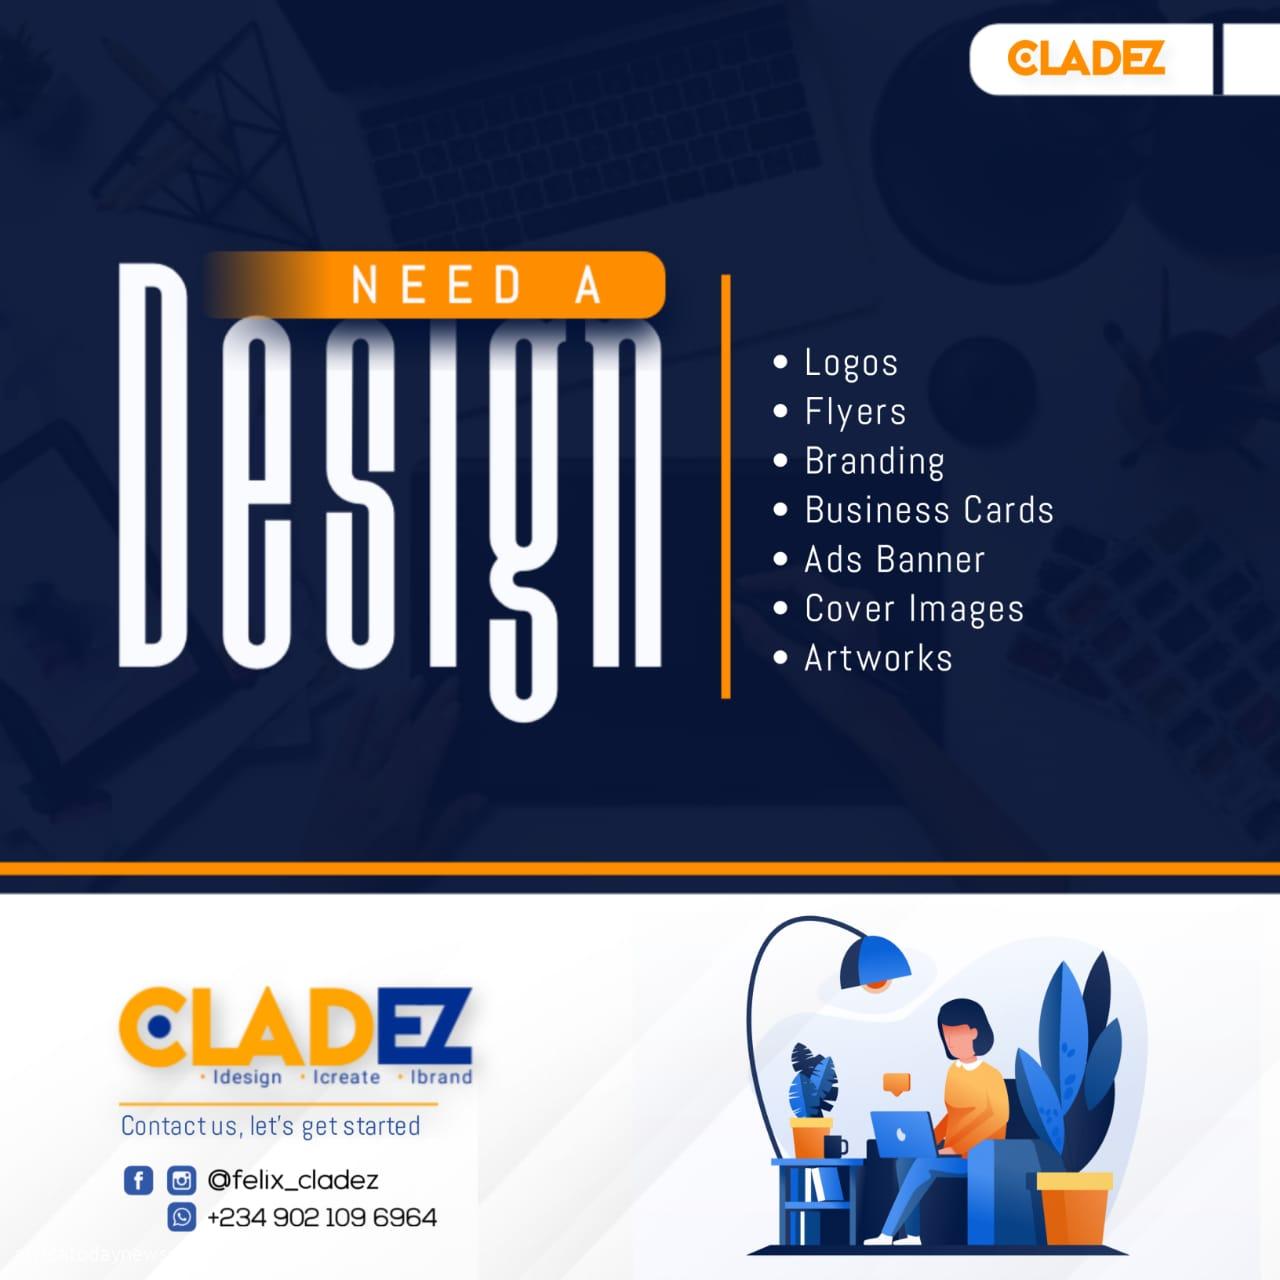 Cladez Designs The Hub Of Enviable Graphic Designs